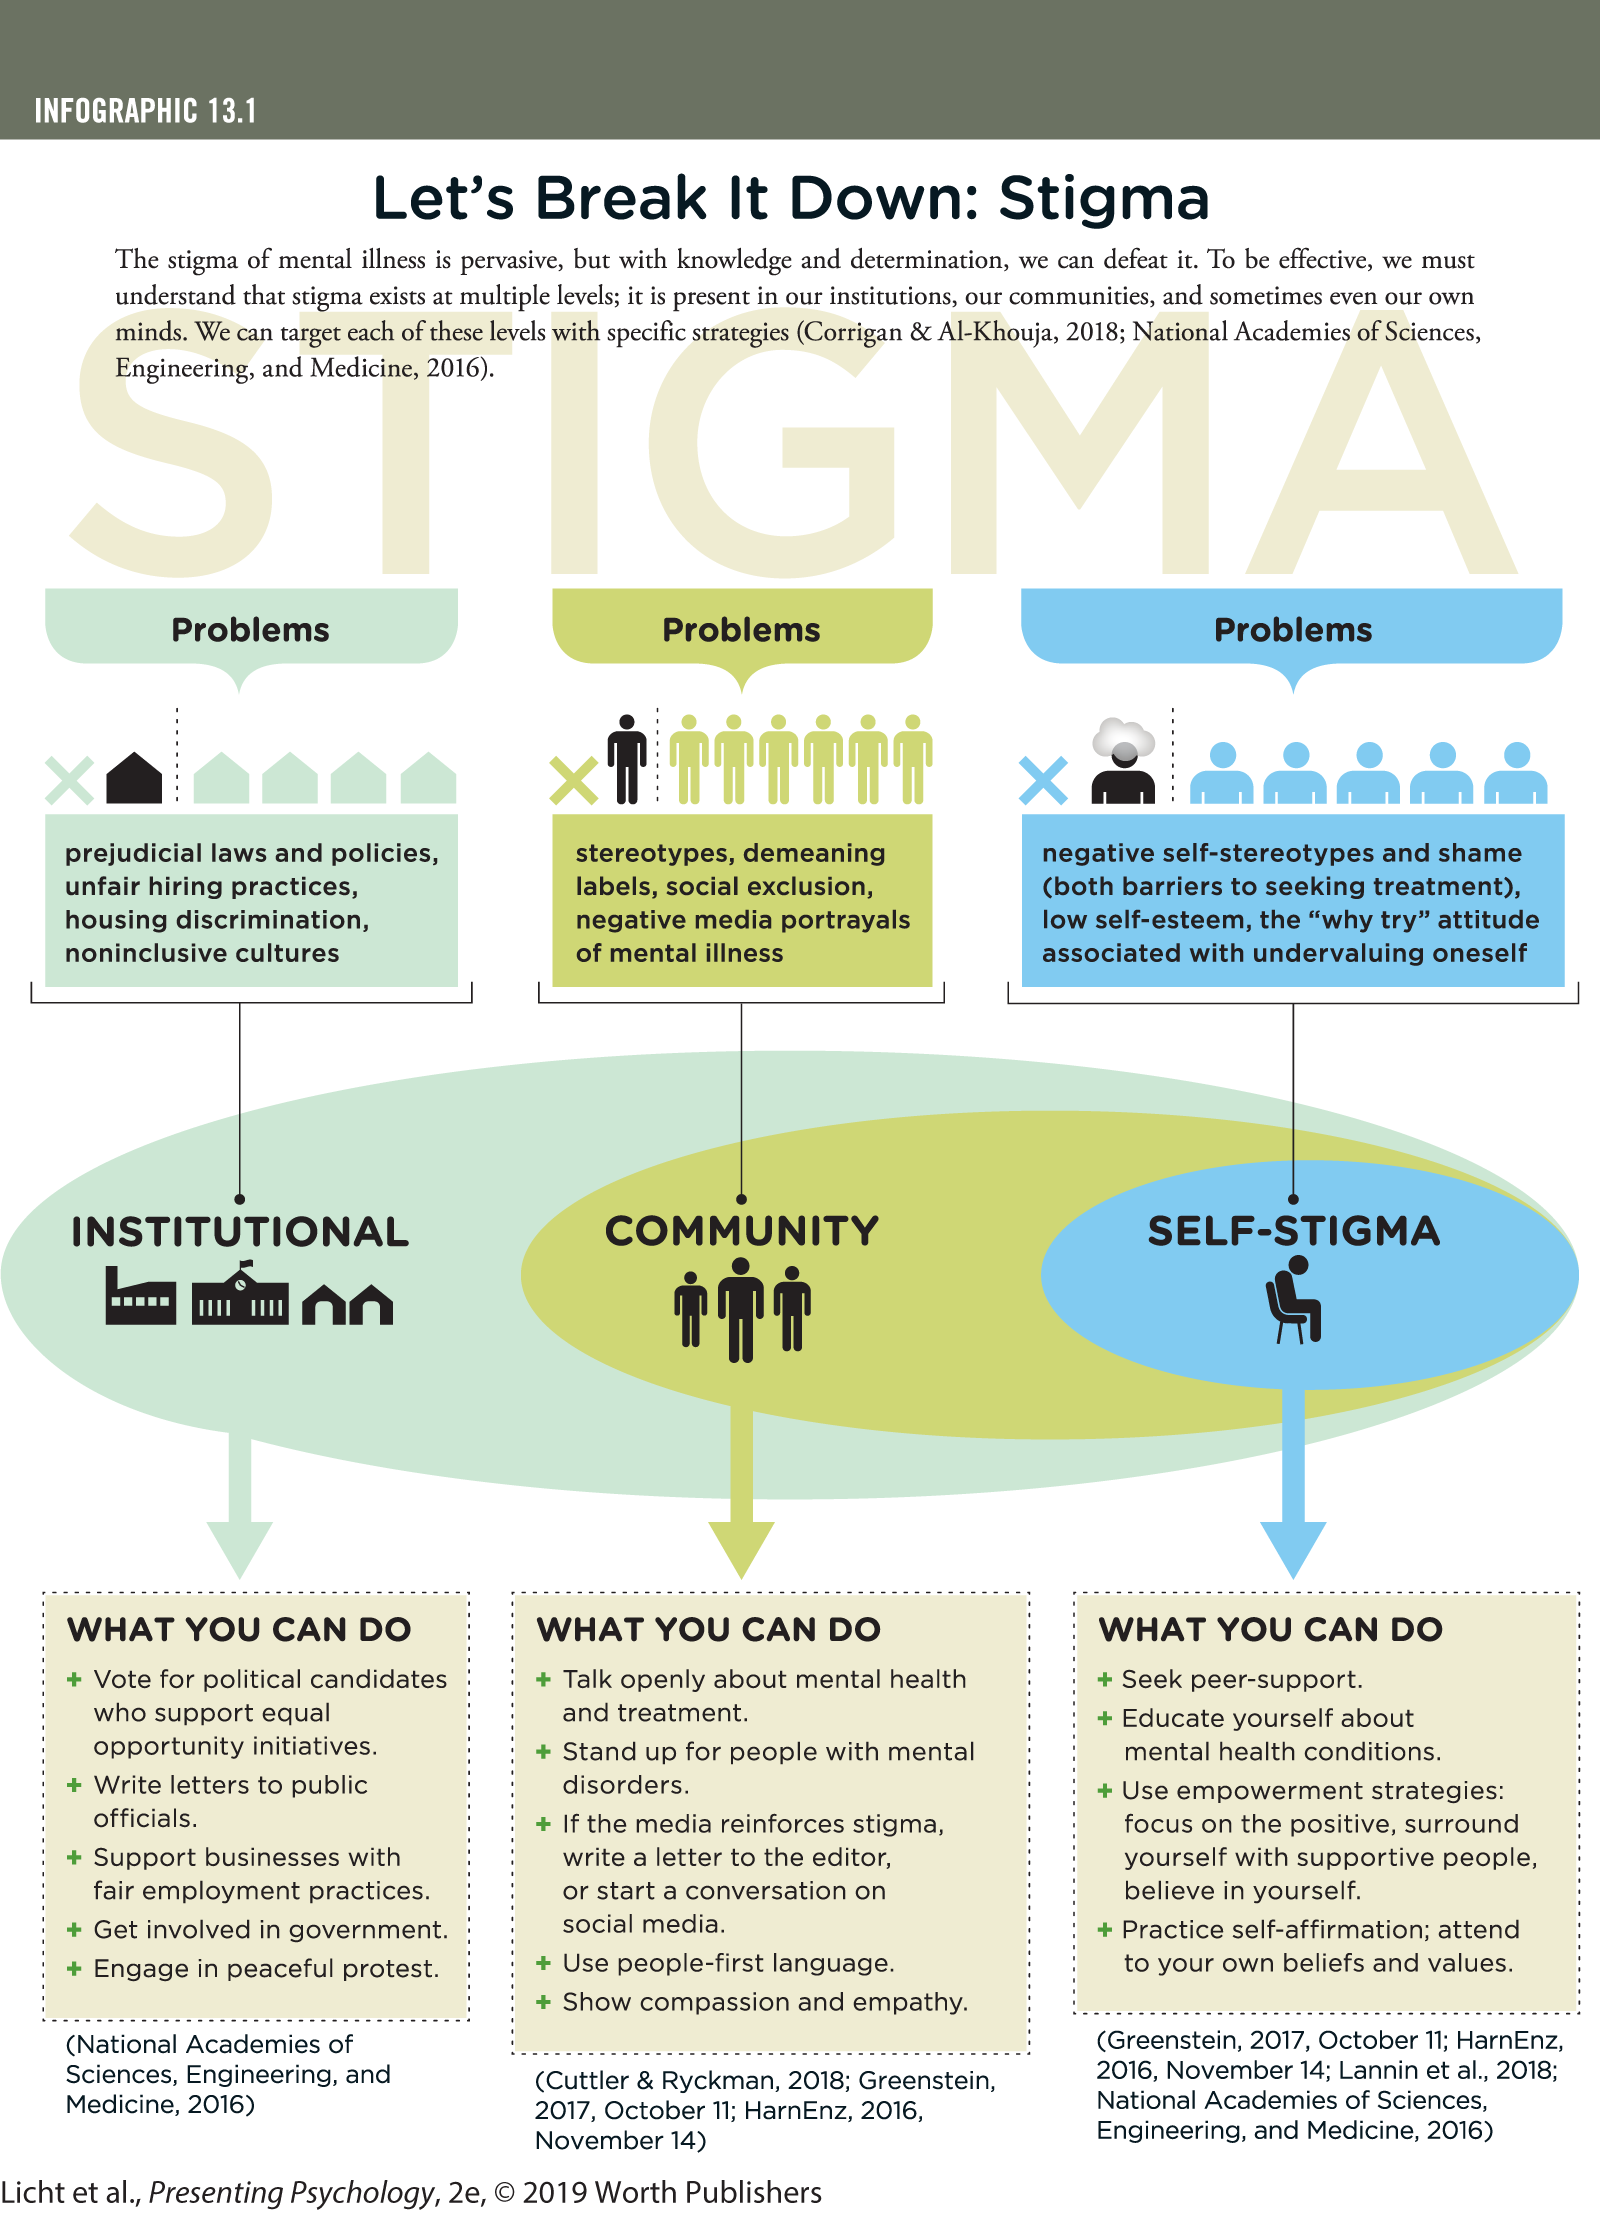 An infographic titled, Let’s Break It Down, Stigma, describes the problems associated with the mental illness and how to break it down. You can read full description from the link below